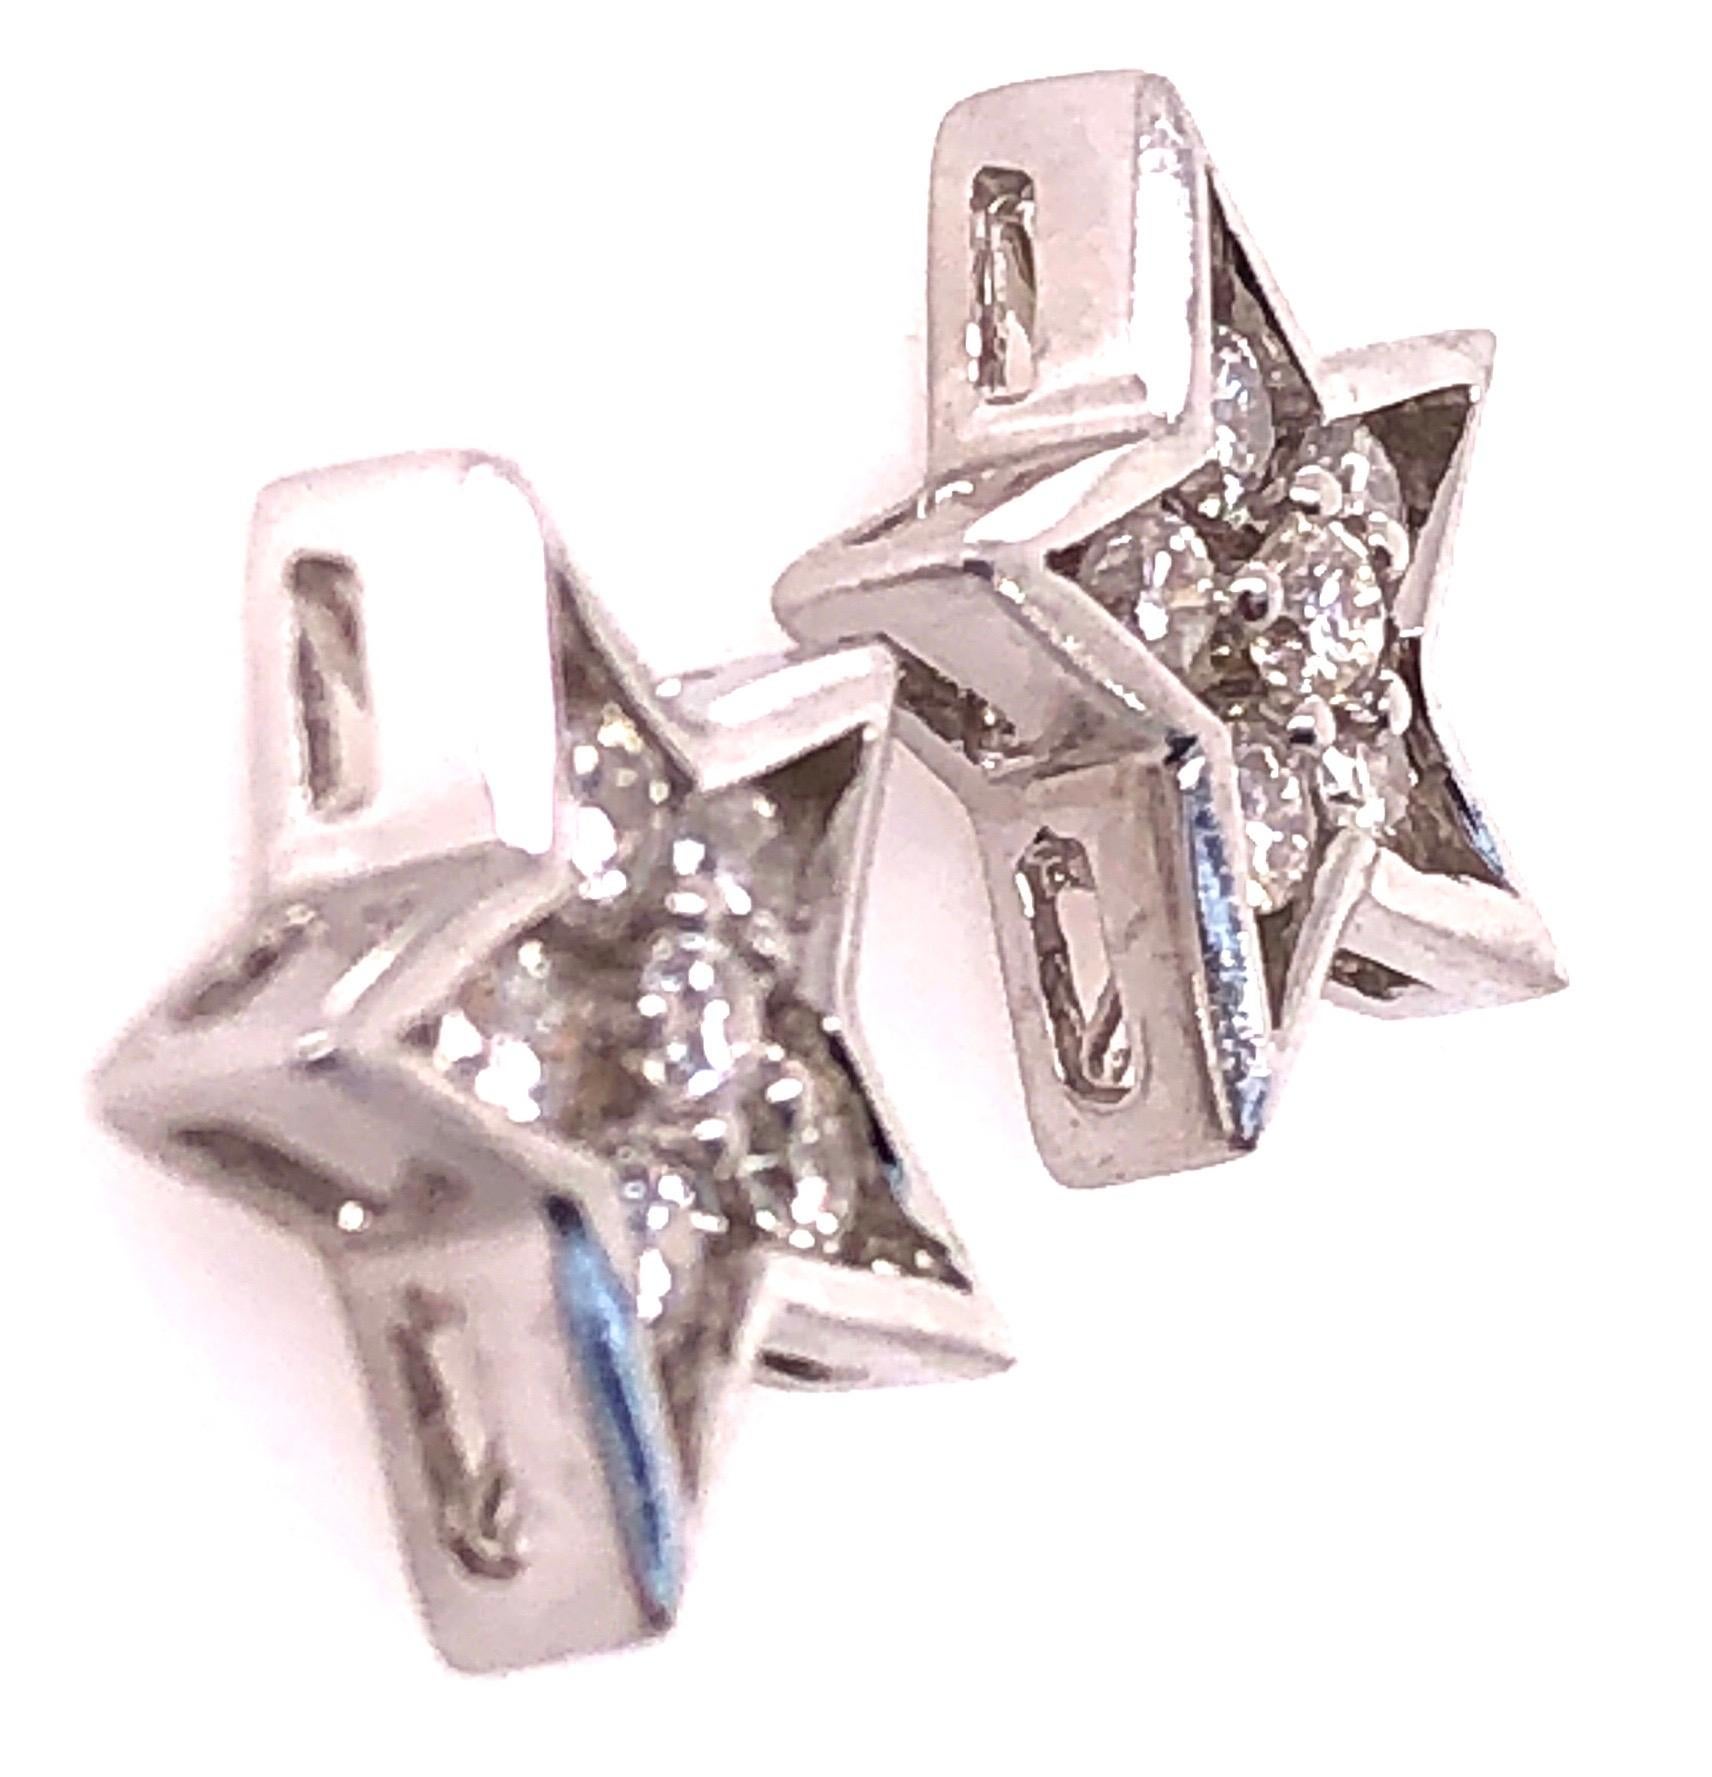 14Kt White Gold Star Earrings 0.50 Total Diamond Weight.
2.51 grams total weight.